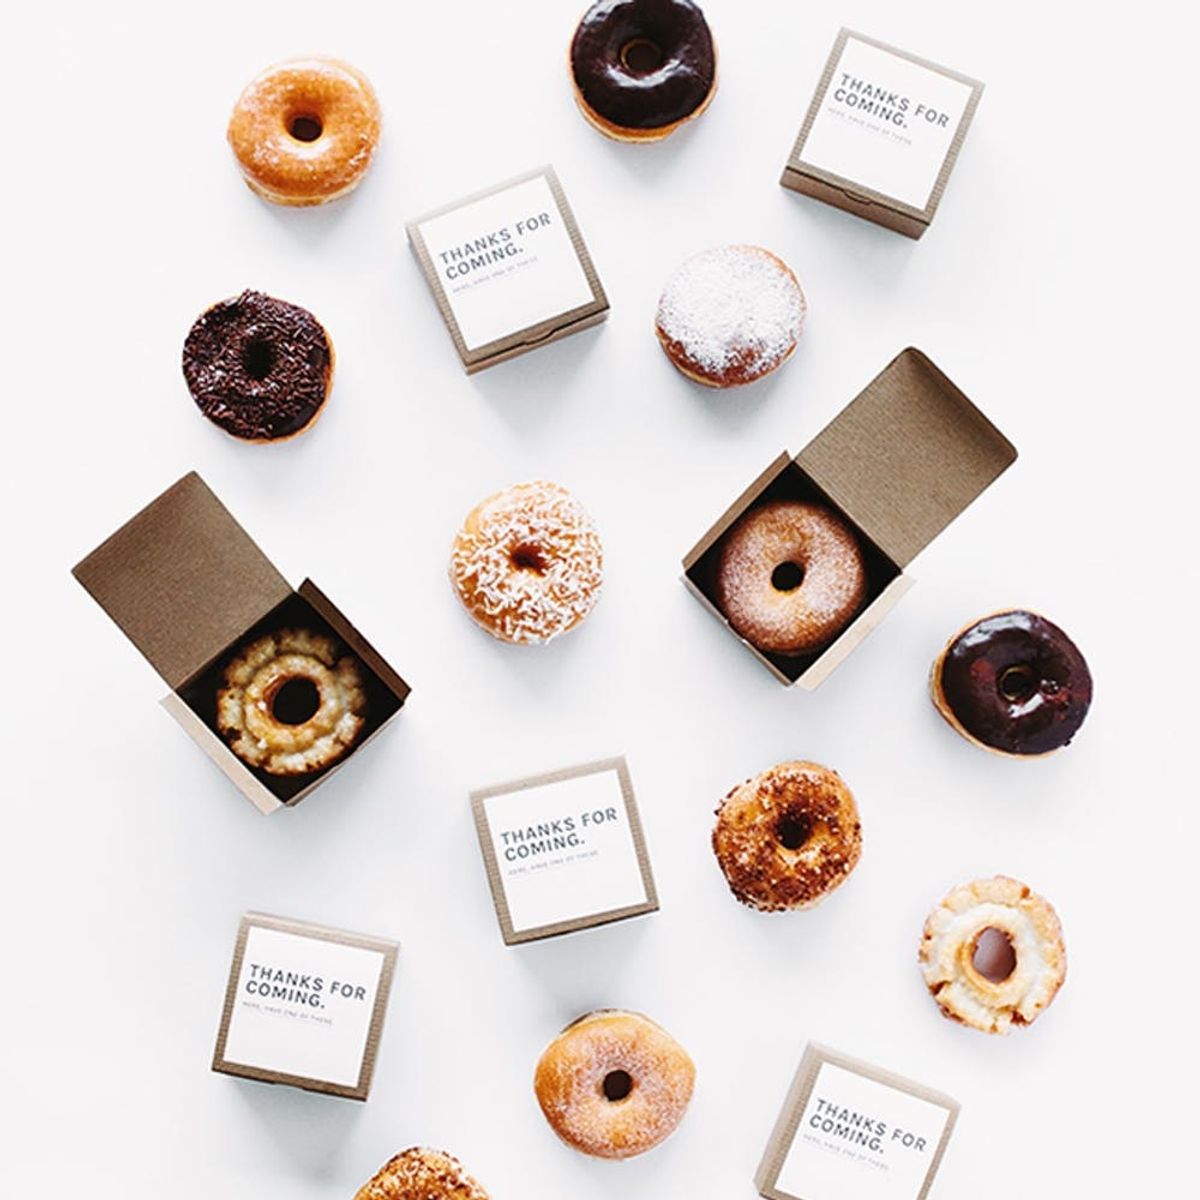 11 Wedding Donut Bar Essentials That Are Too Sweet to Pass Up